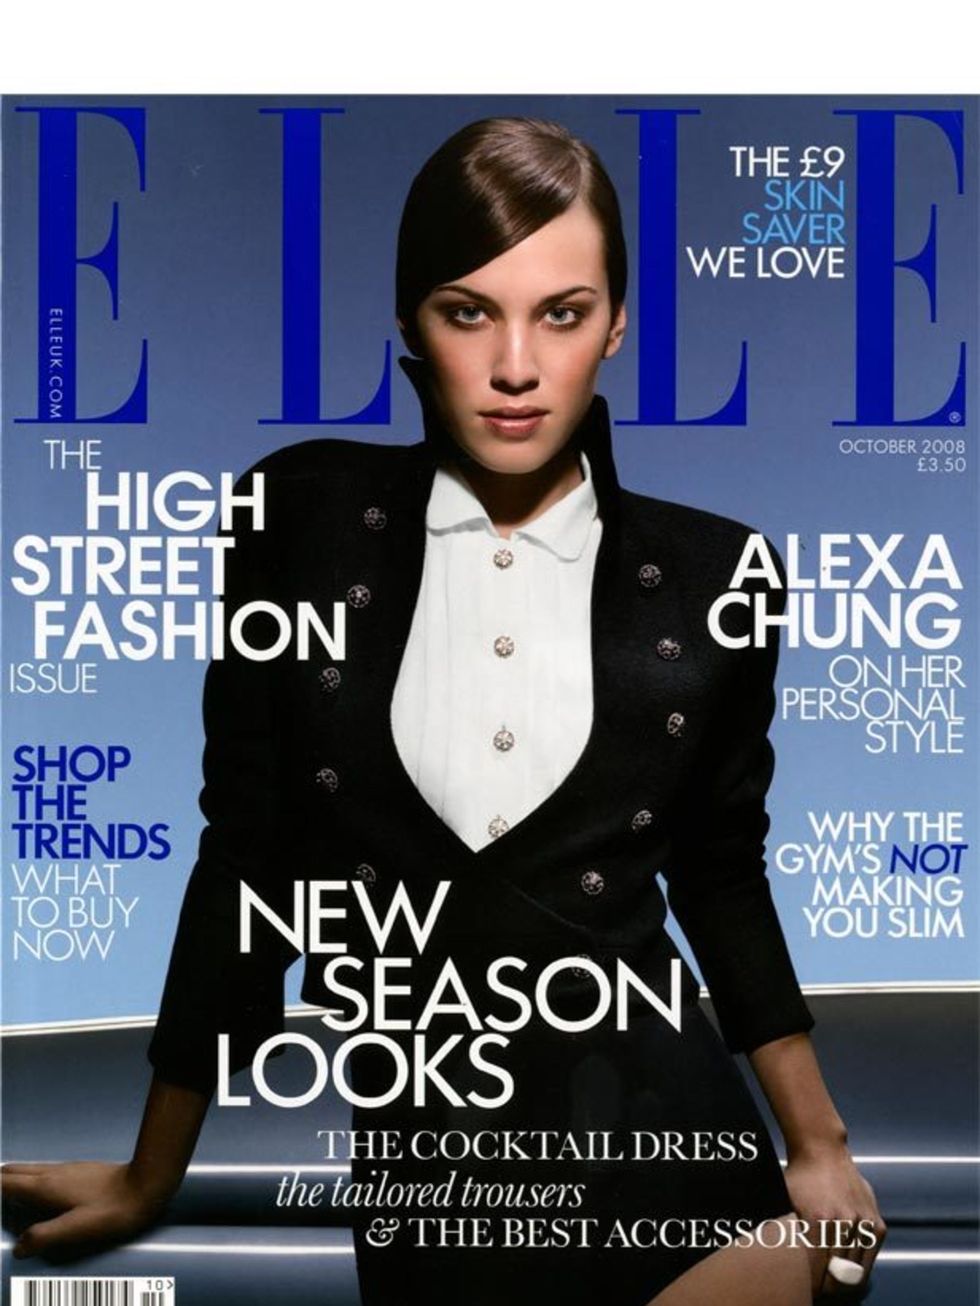 <p><a href="http://www.elleuk.com/starstyle/style-files/%28section%29/Alexa-Chung">Alexa Chung</a>, October 2008</p>